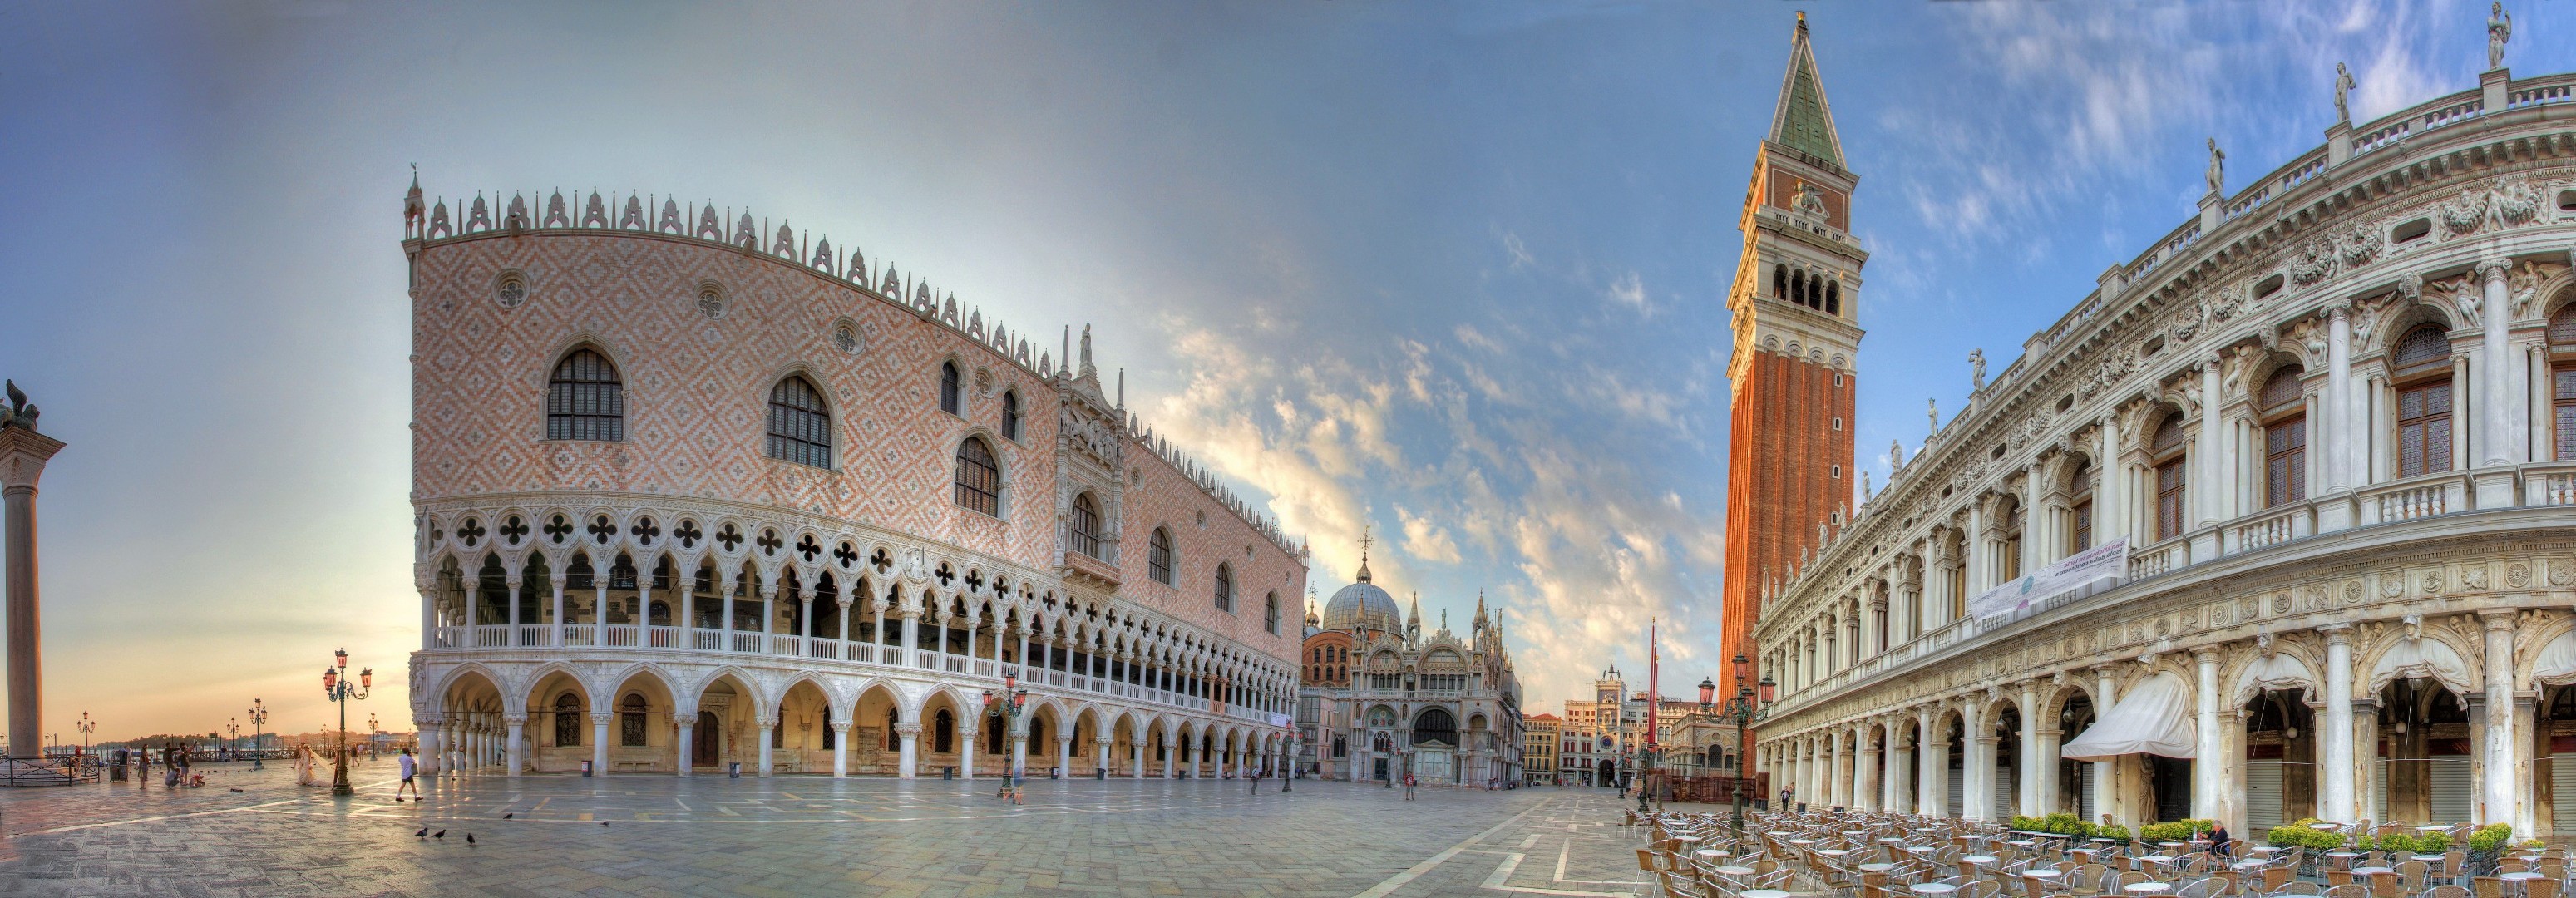 city architecture travel building venetian outdoors ancient tourism sky landmark old square gothic plaza exterior arch tower